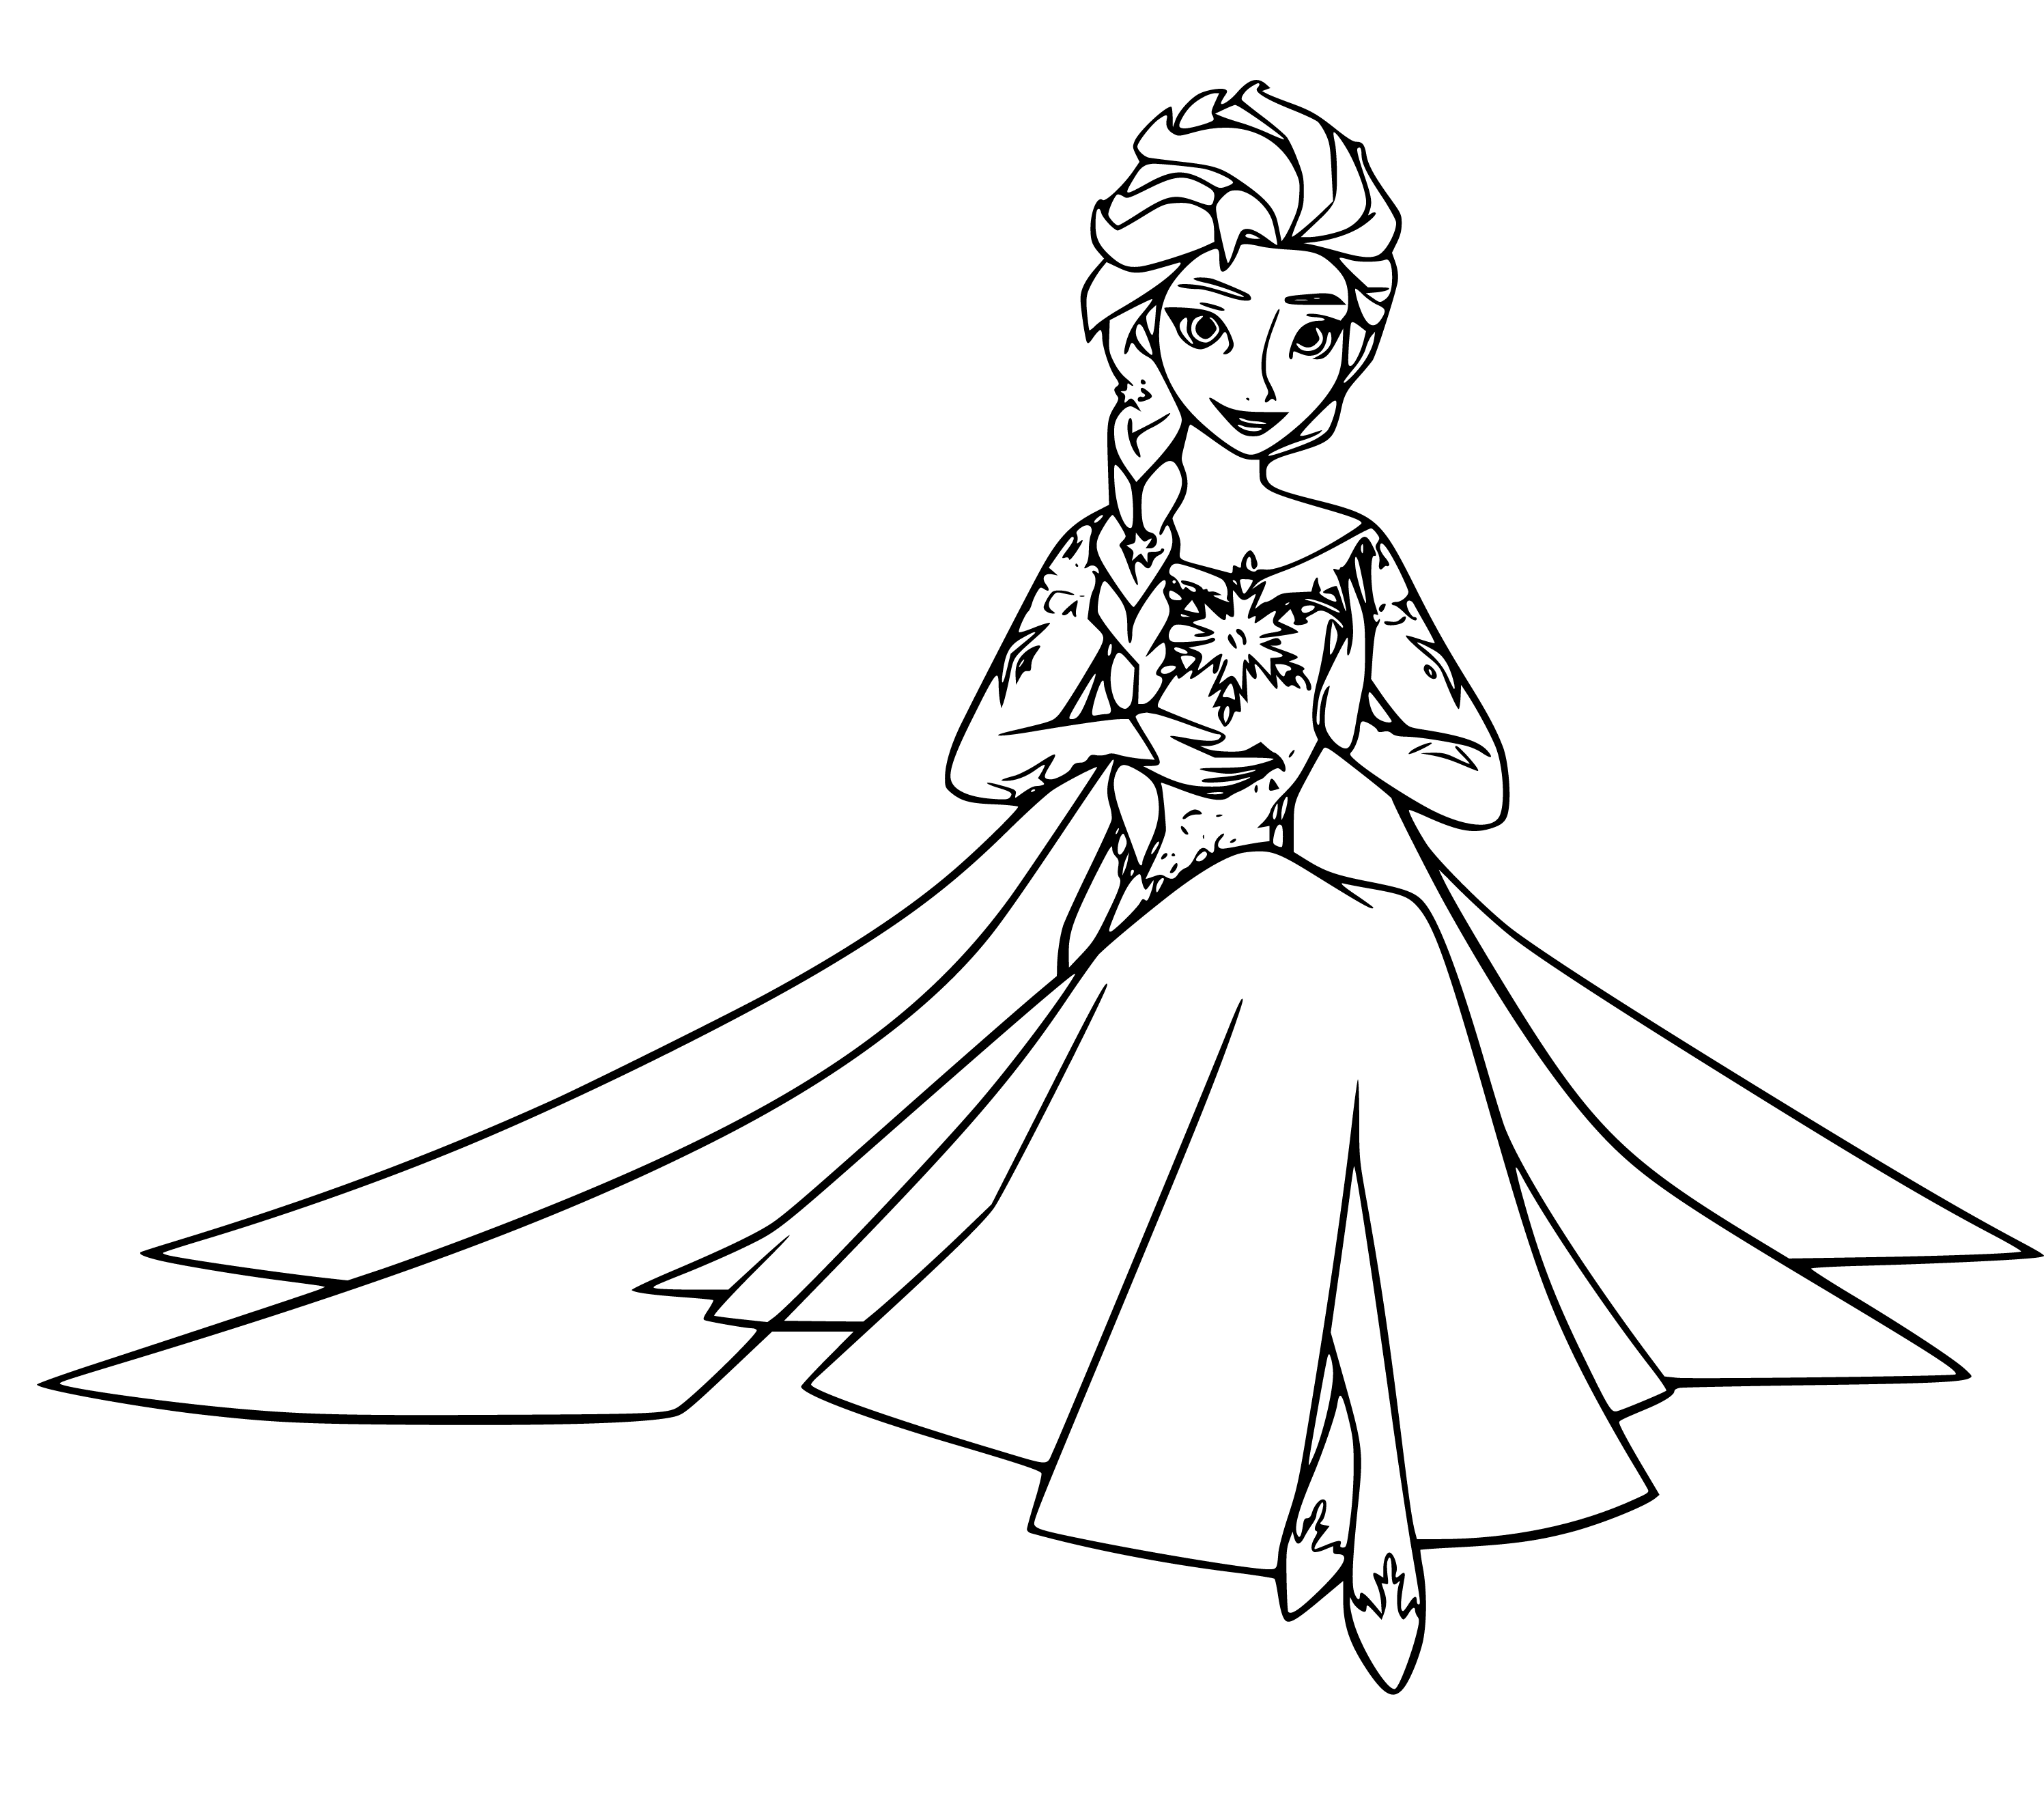 Printable Lovely Elsa Coloring Page for kids.